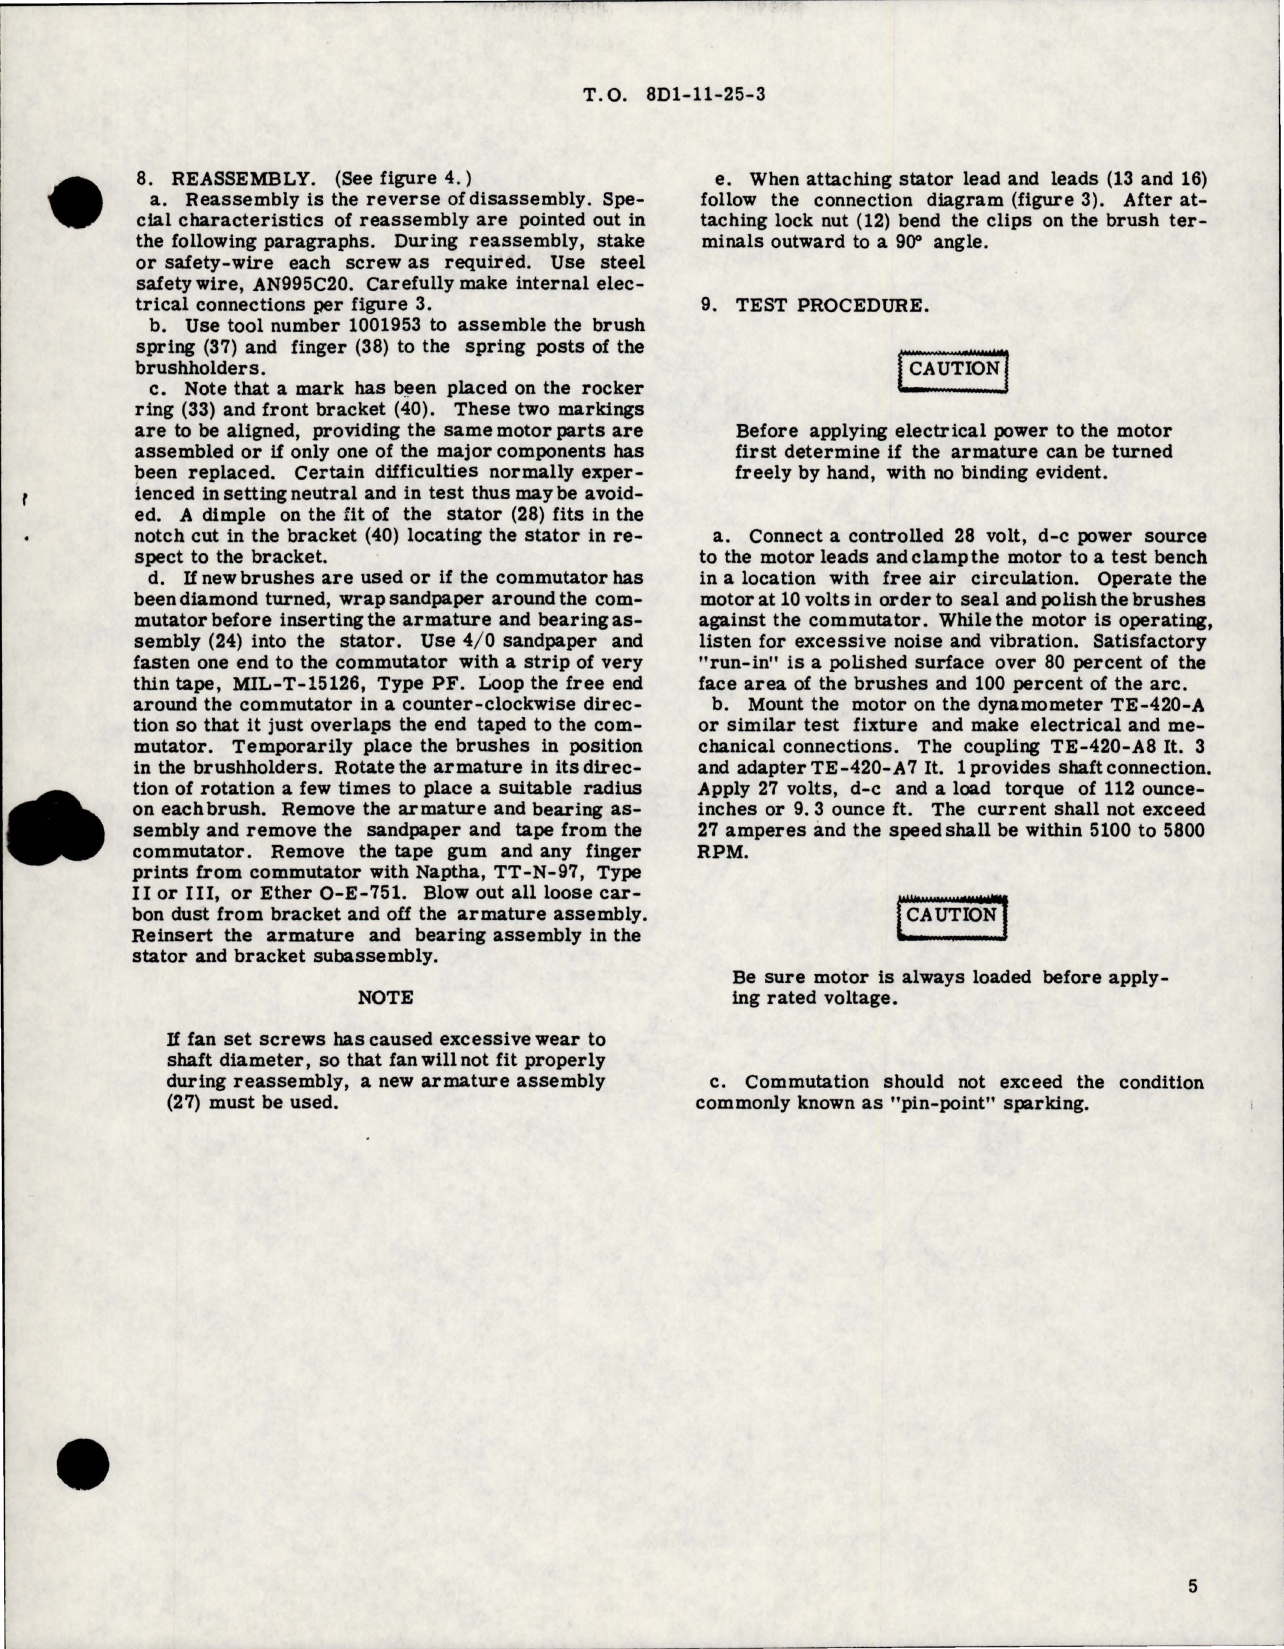 Sample page 5 from AirCorps Library document: Overhaul Instructions with Parts for Aircraft DC Motor - Part A28A8657 